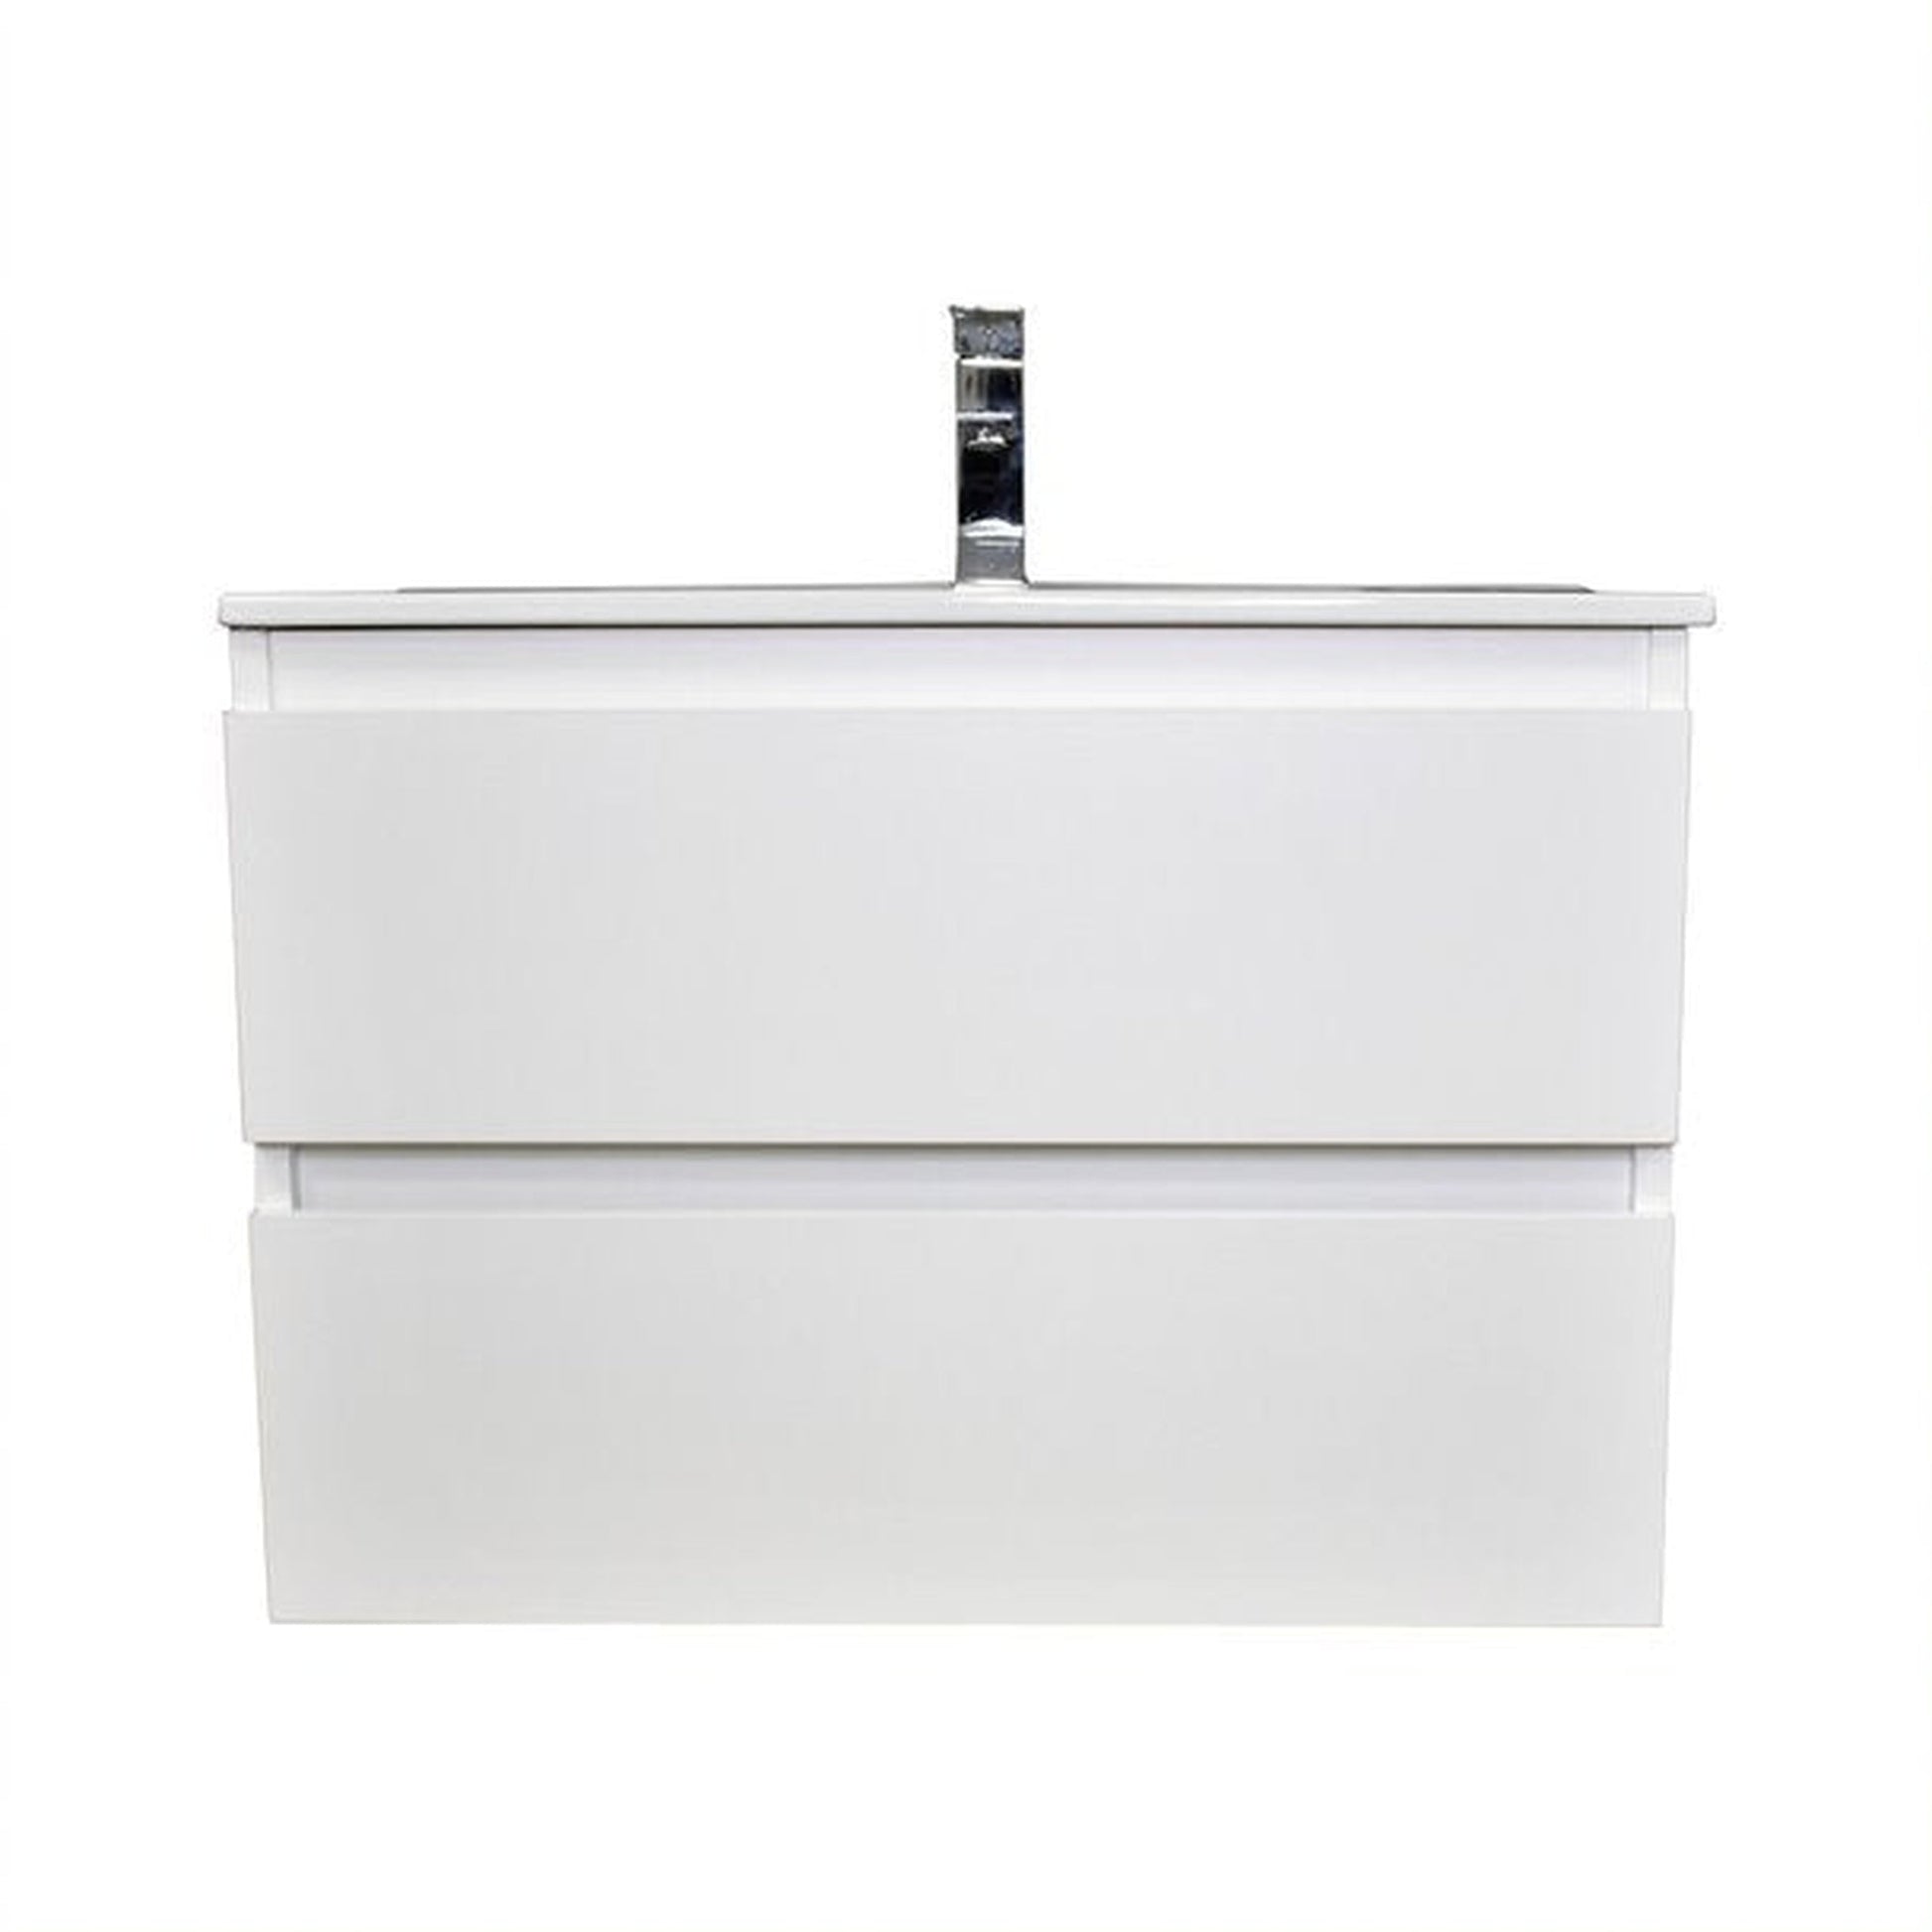 Volpa USA Salt 24" x 18" White Wall-Mounted Floating Bathroom Vanity With Drawers, Integrated Porcelain Ceramic Top and Ceramic Sink